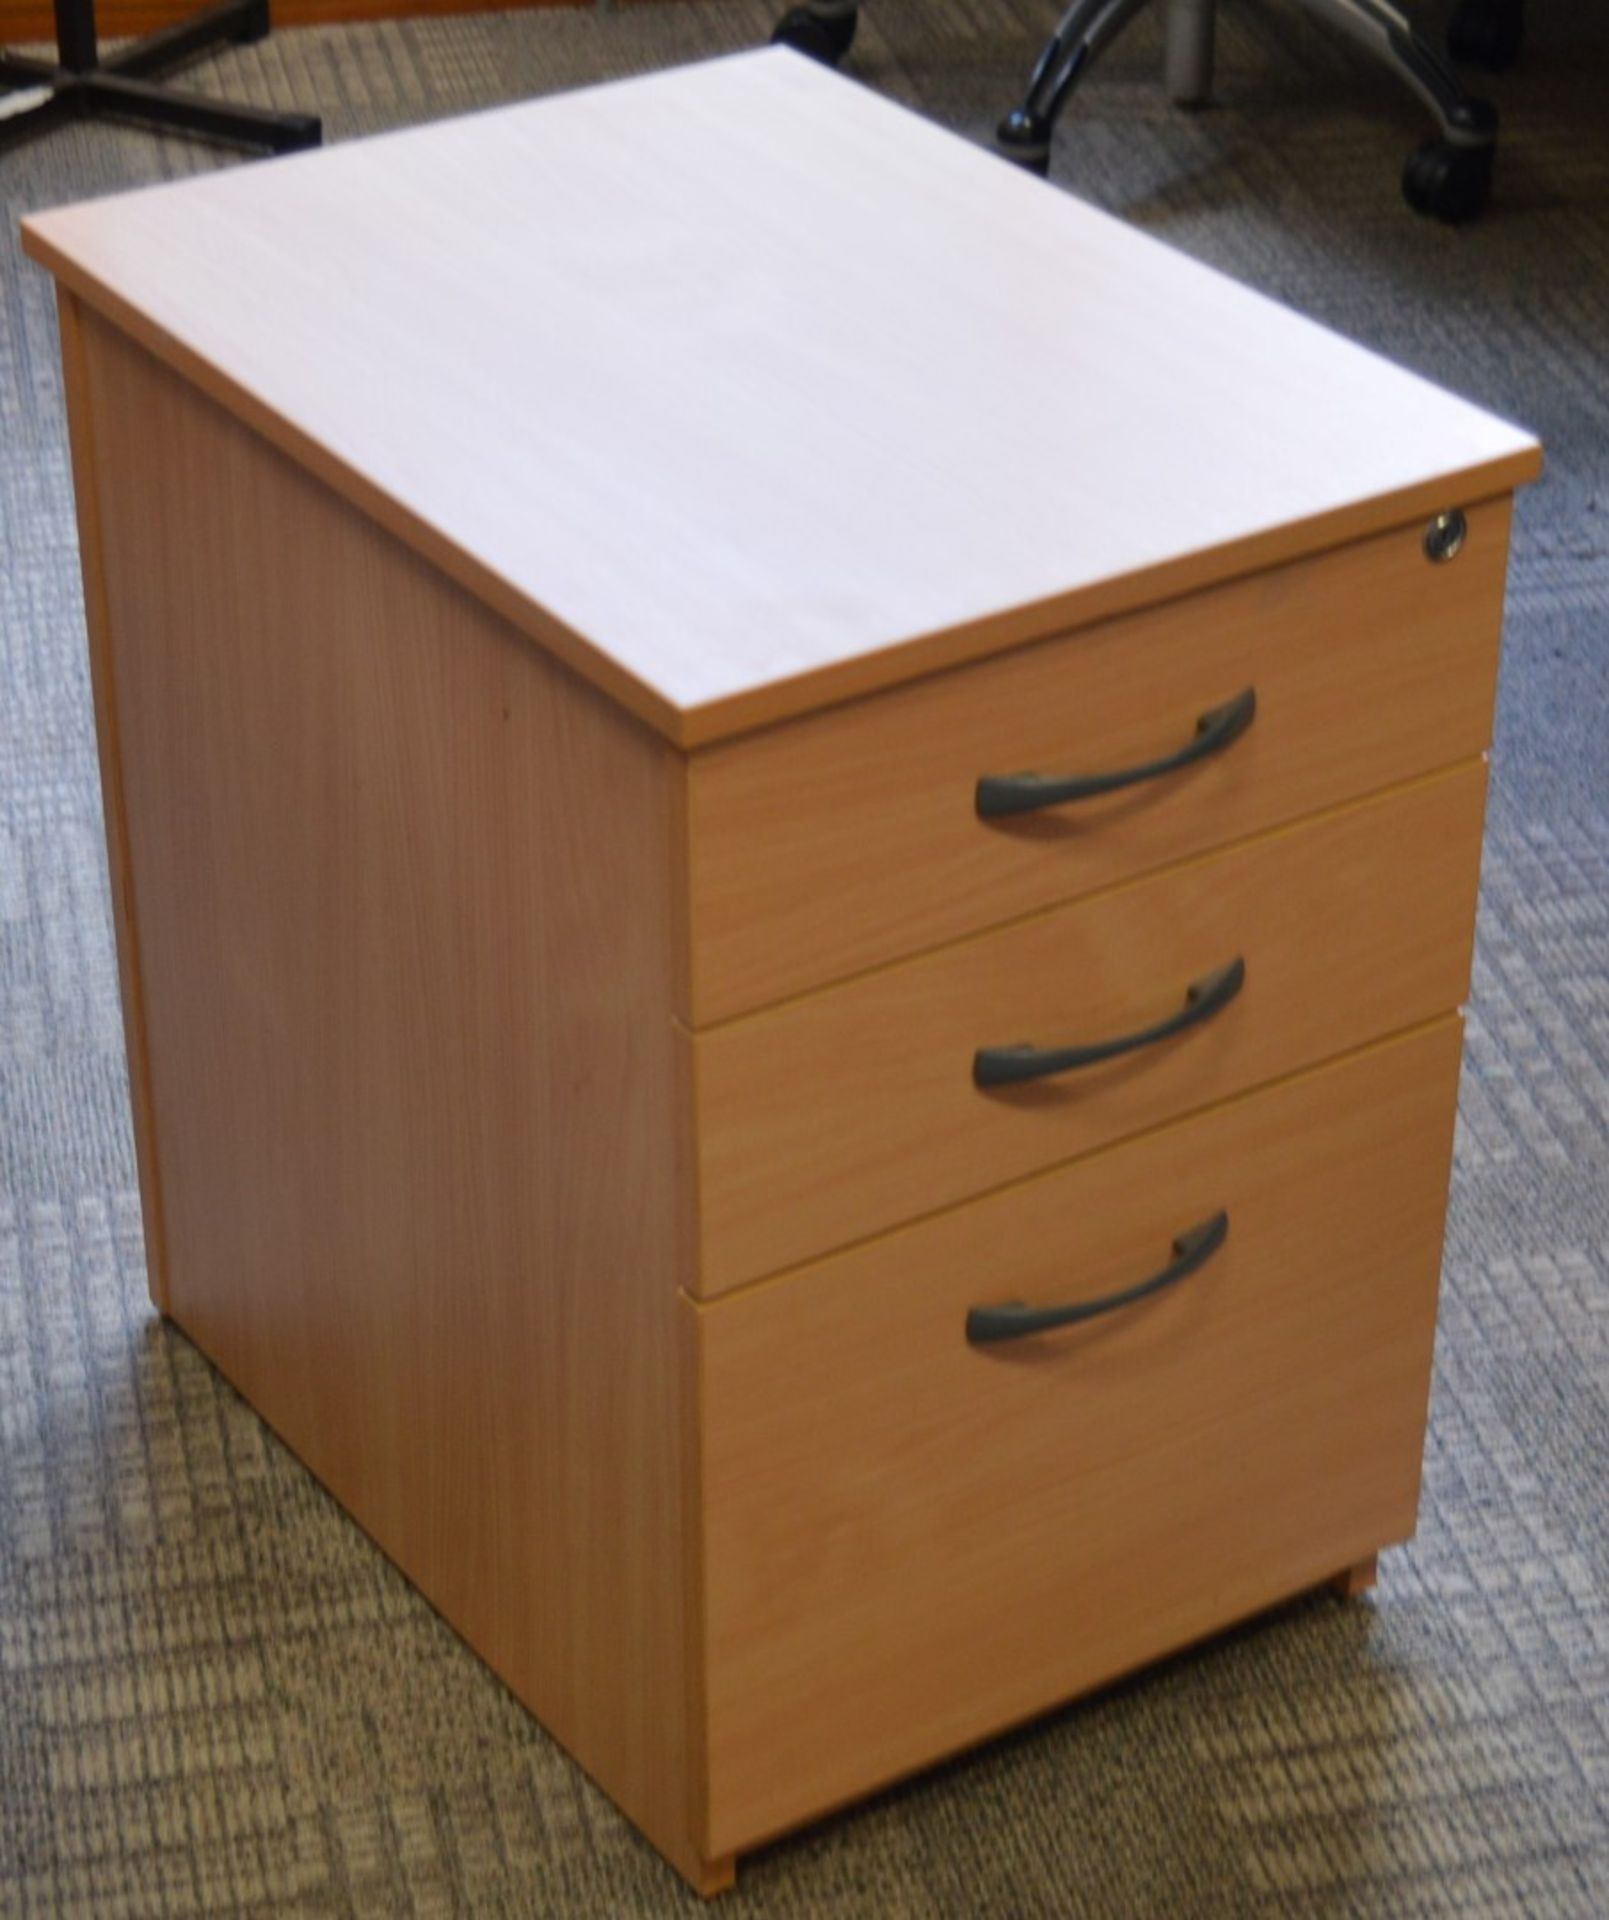 1 x Three Drawer Mobile Pedestal Drawers - With NO Key - Modern Beech Finish - Two Storage Drawers - Image 4 of 4